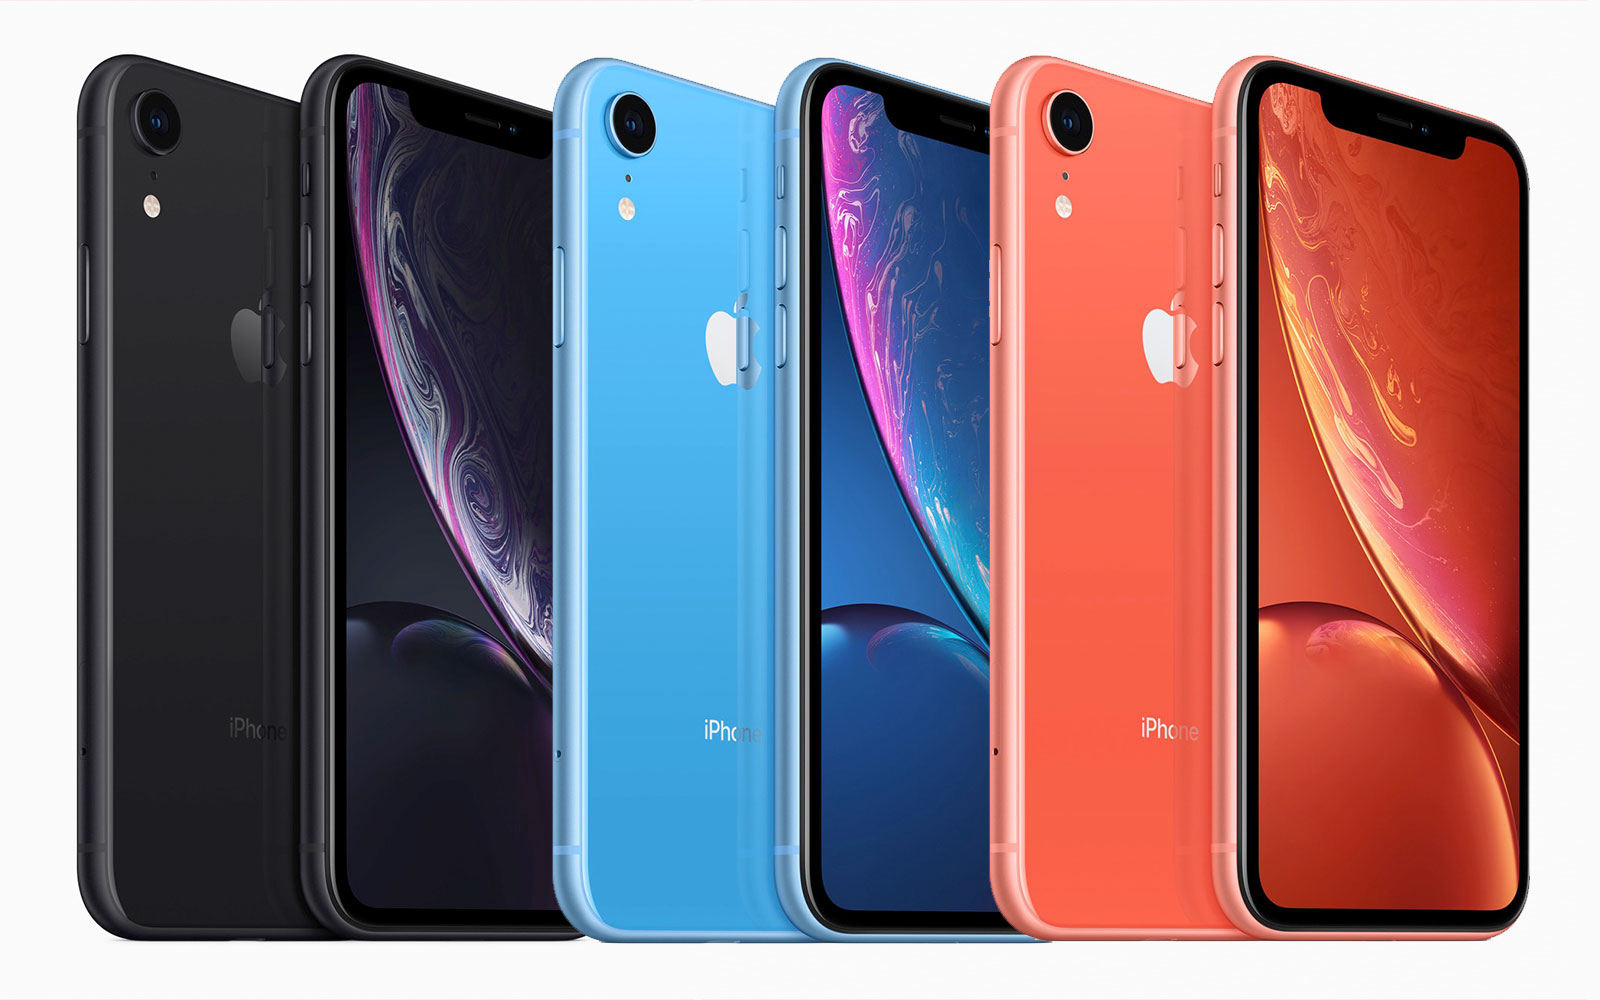 Apple's iPhone Xr is an 'affordable' iPhone X